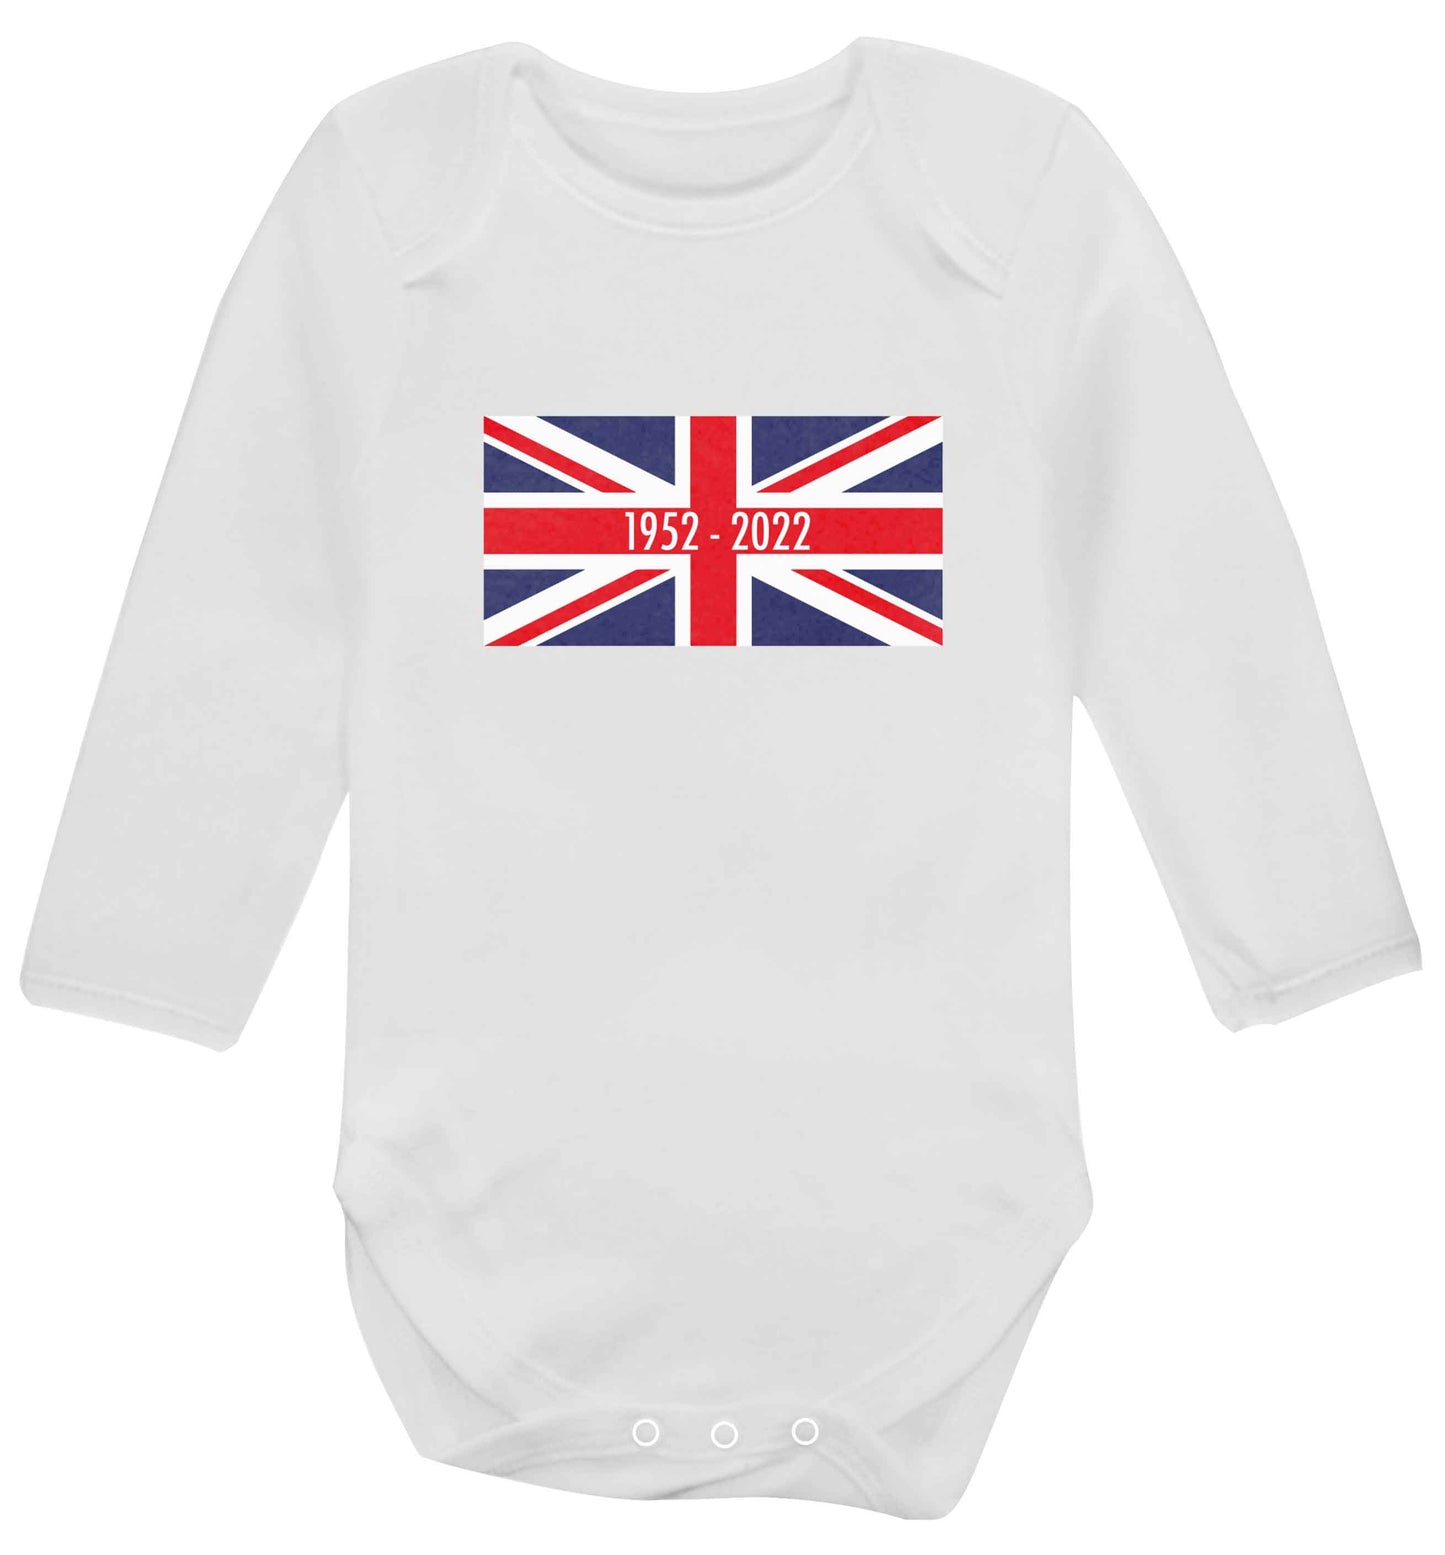 British flag Queens jubilee baby vest long sleeved white 6-12 months